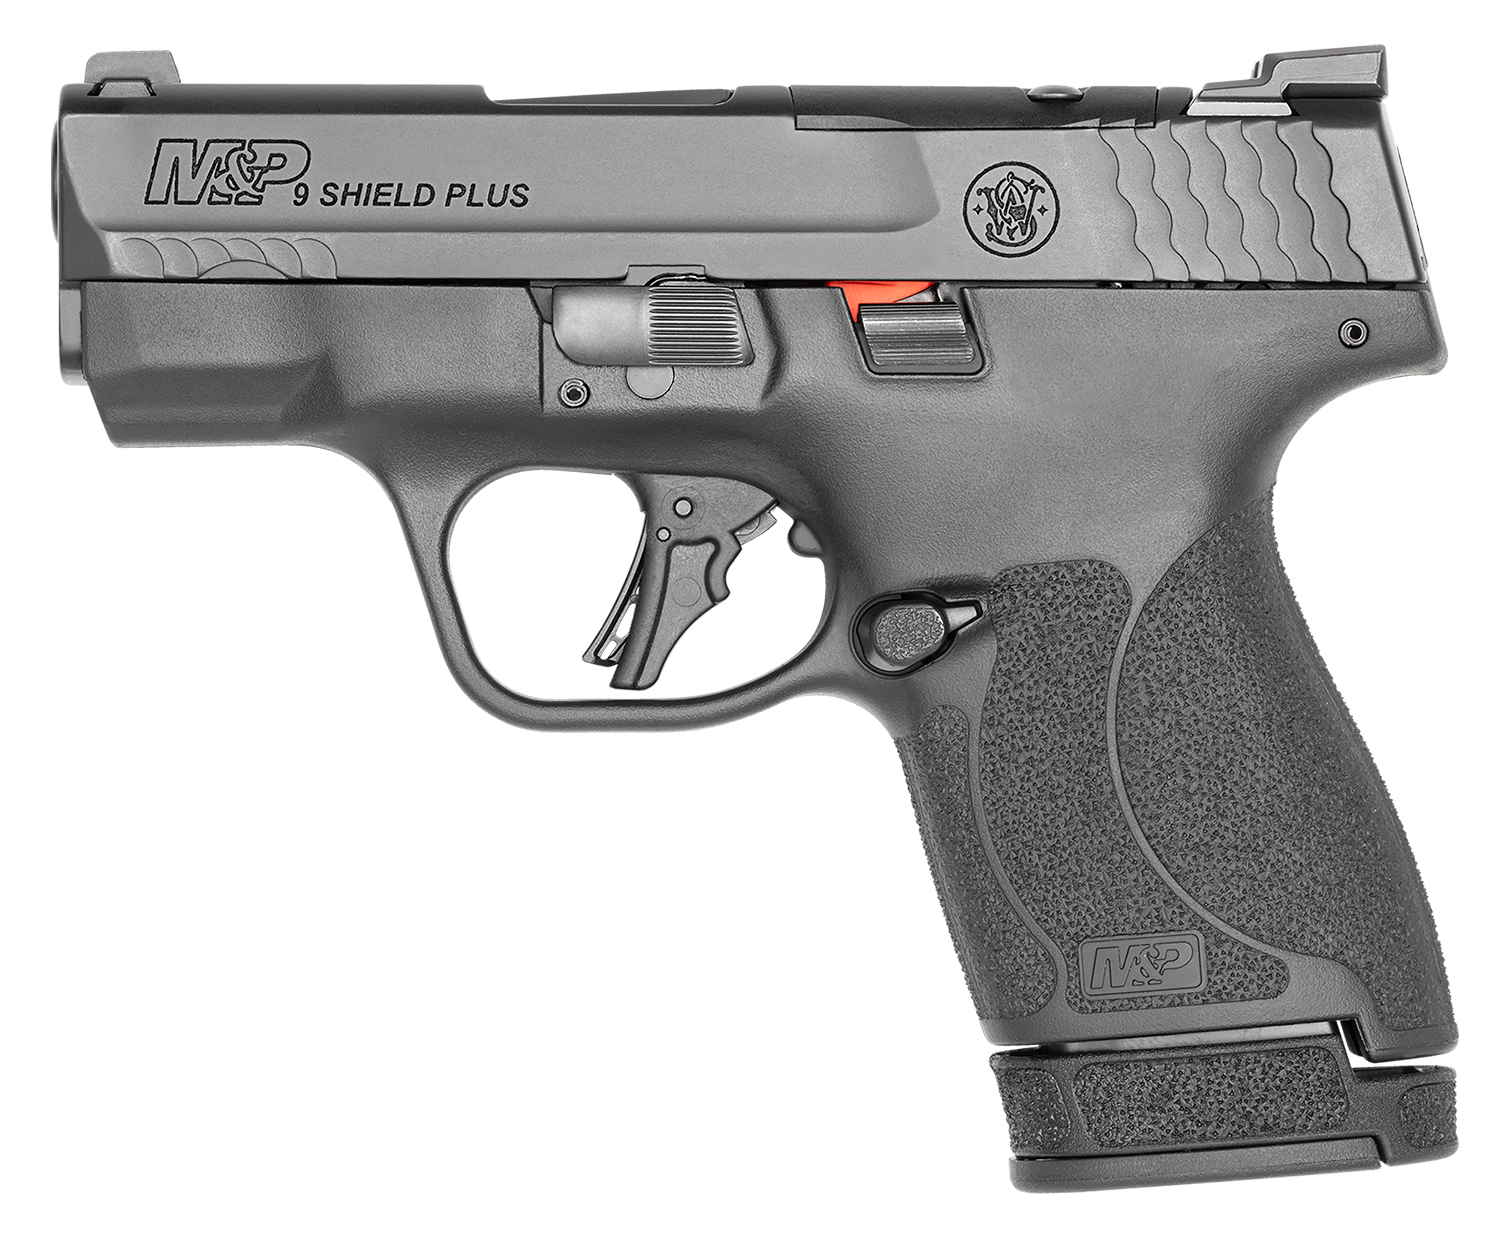 Smith & Wesson M&P Shield Plus 9mm Pistol, Optic Ready with Night Sights, Black (13534)